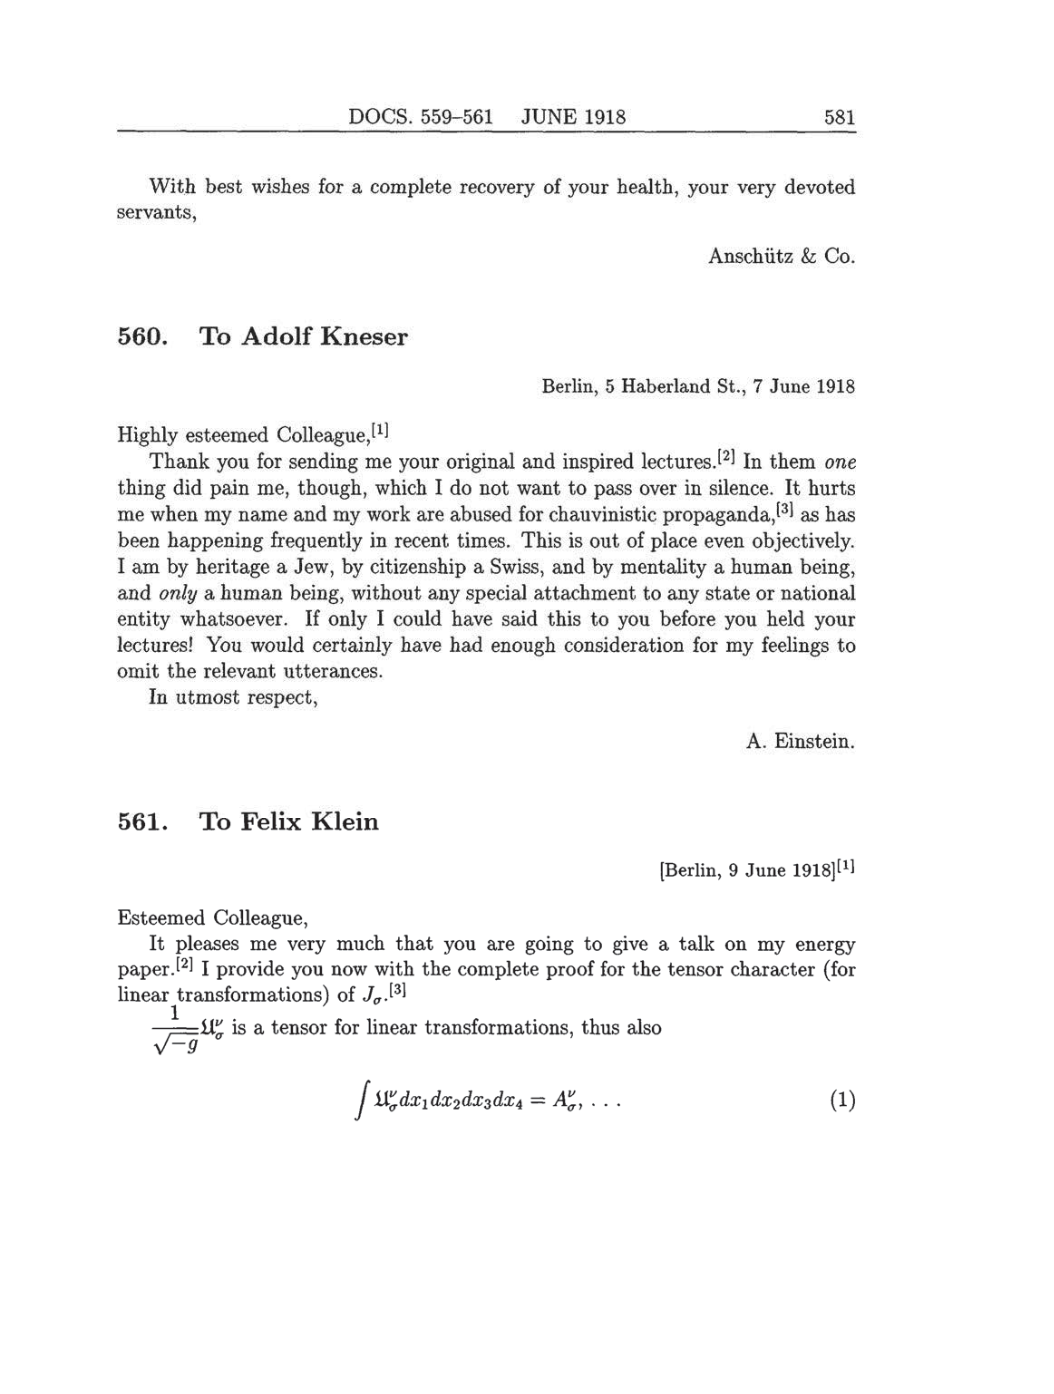 Volume 8: The Berlin Years: Correspondence, 1914-1918 (English translation supplement) page 581